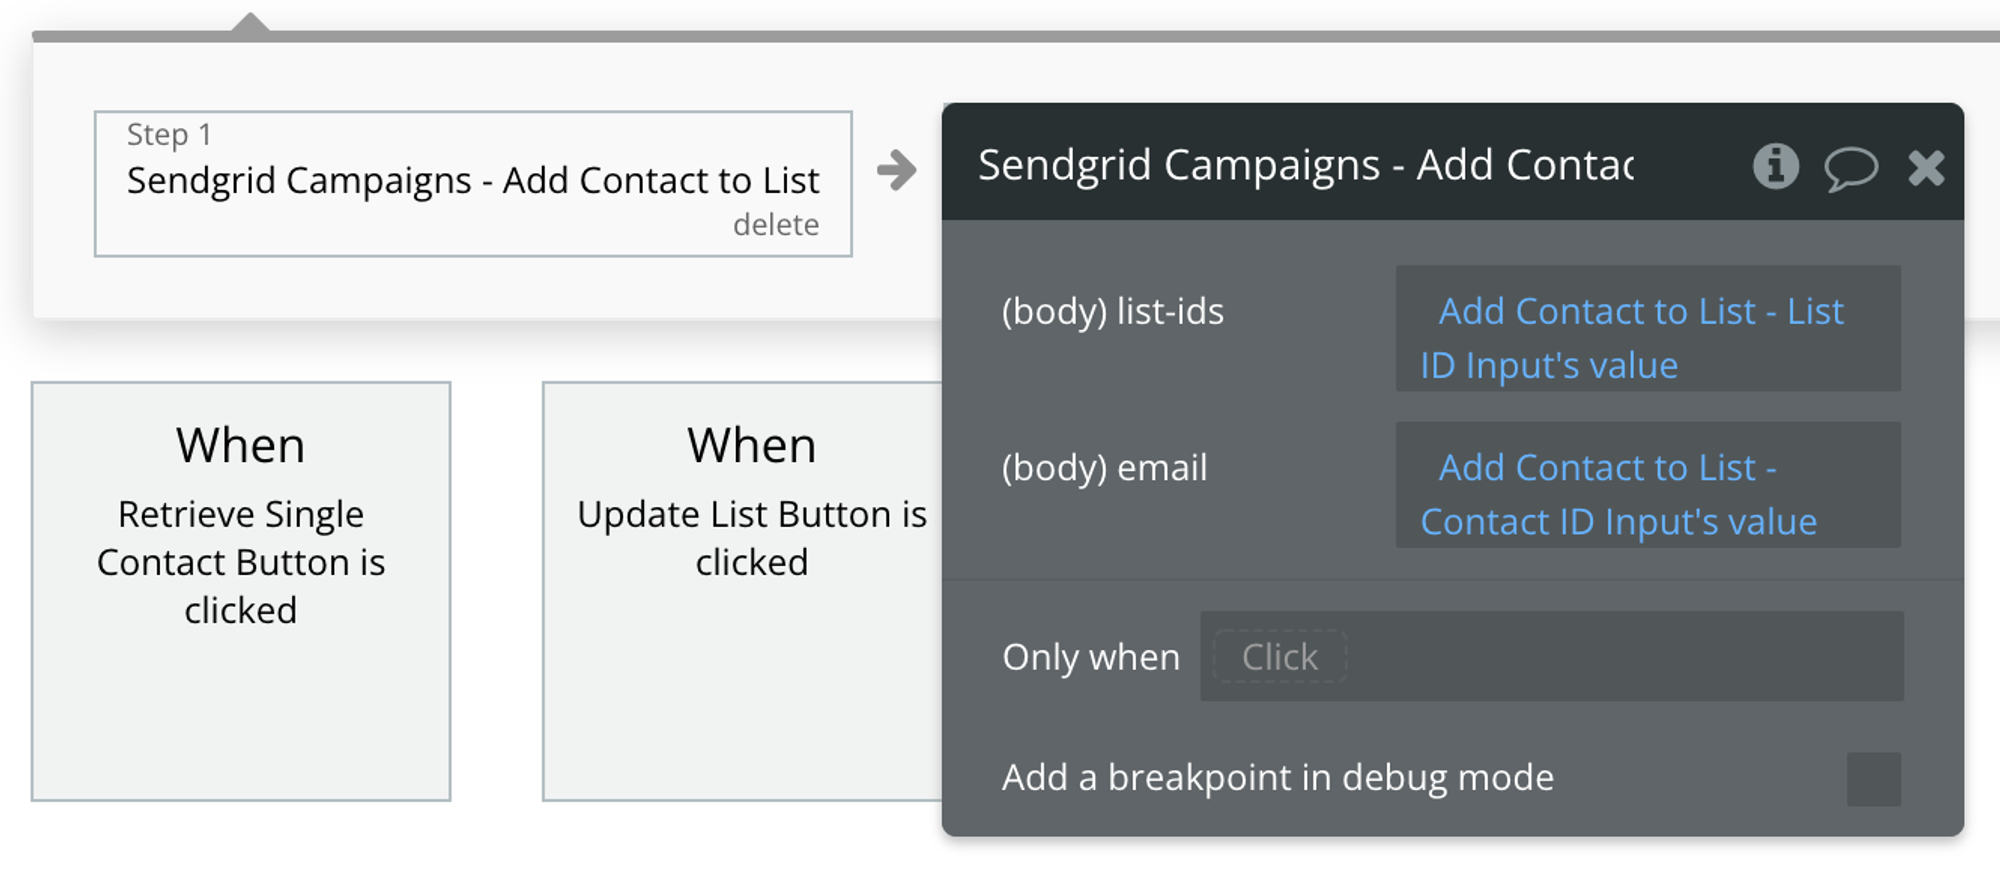 Select Sendgrid Campaigns - Add Contact to List from the list of Plugin actions